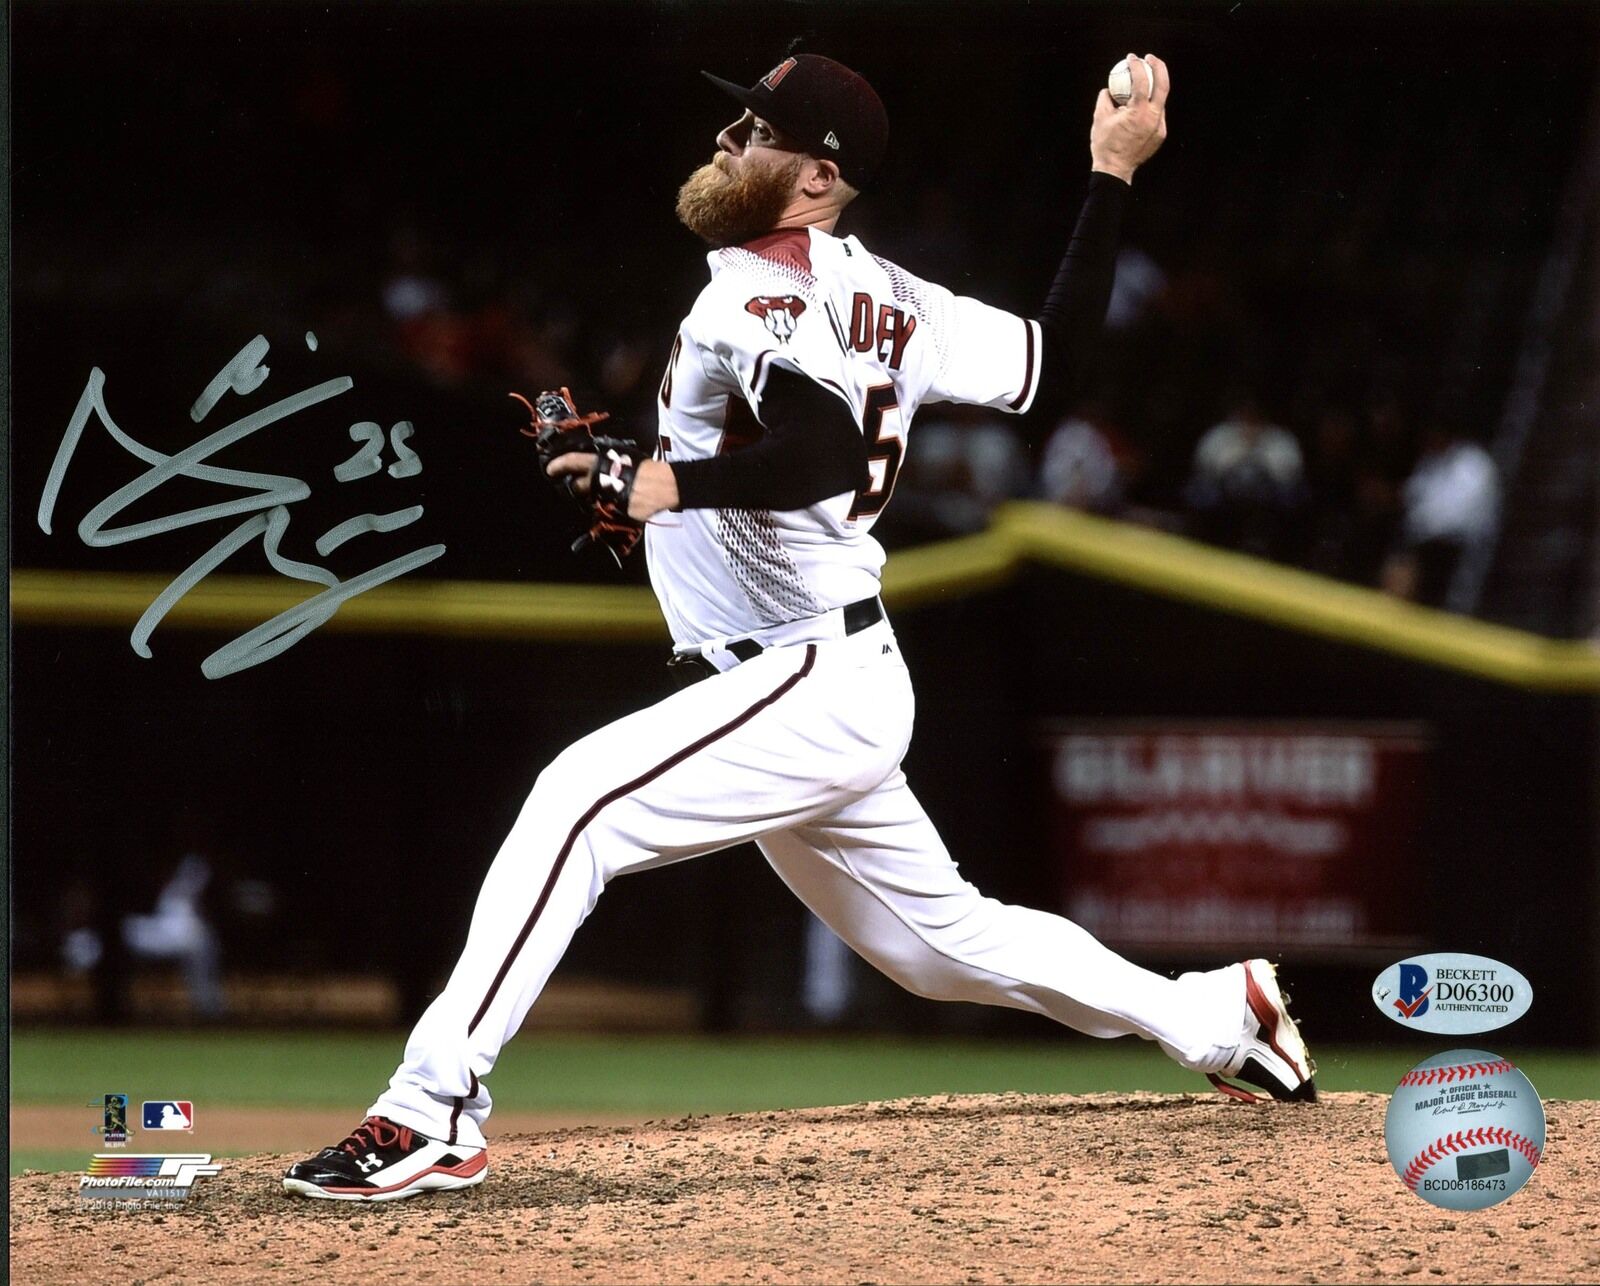 D-Backs Archie Bradley Authentic Signed 8x10 Photo Poster painting Horizontal White Jersey BAS